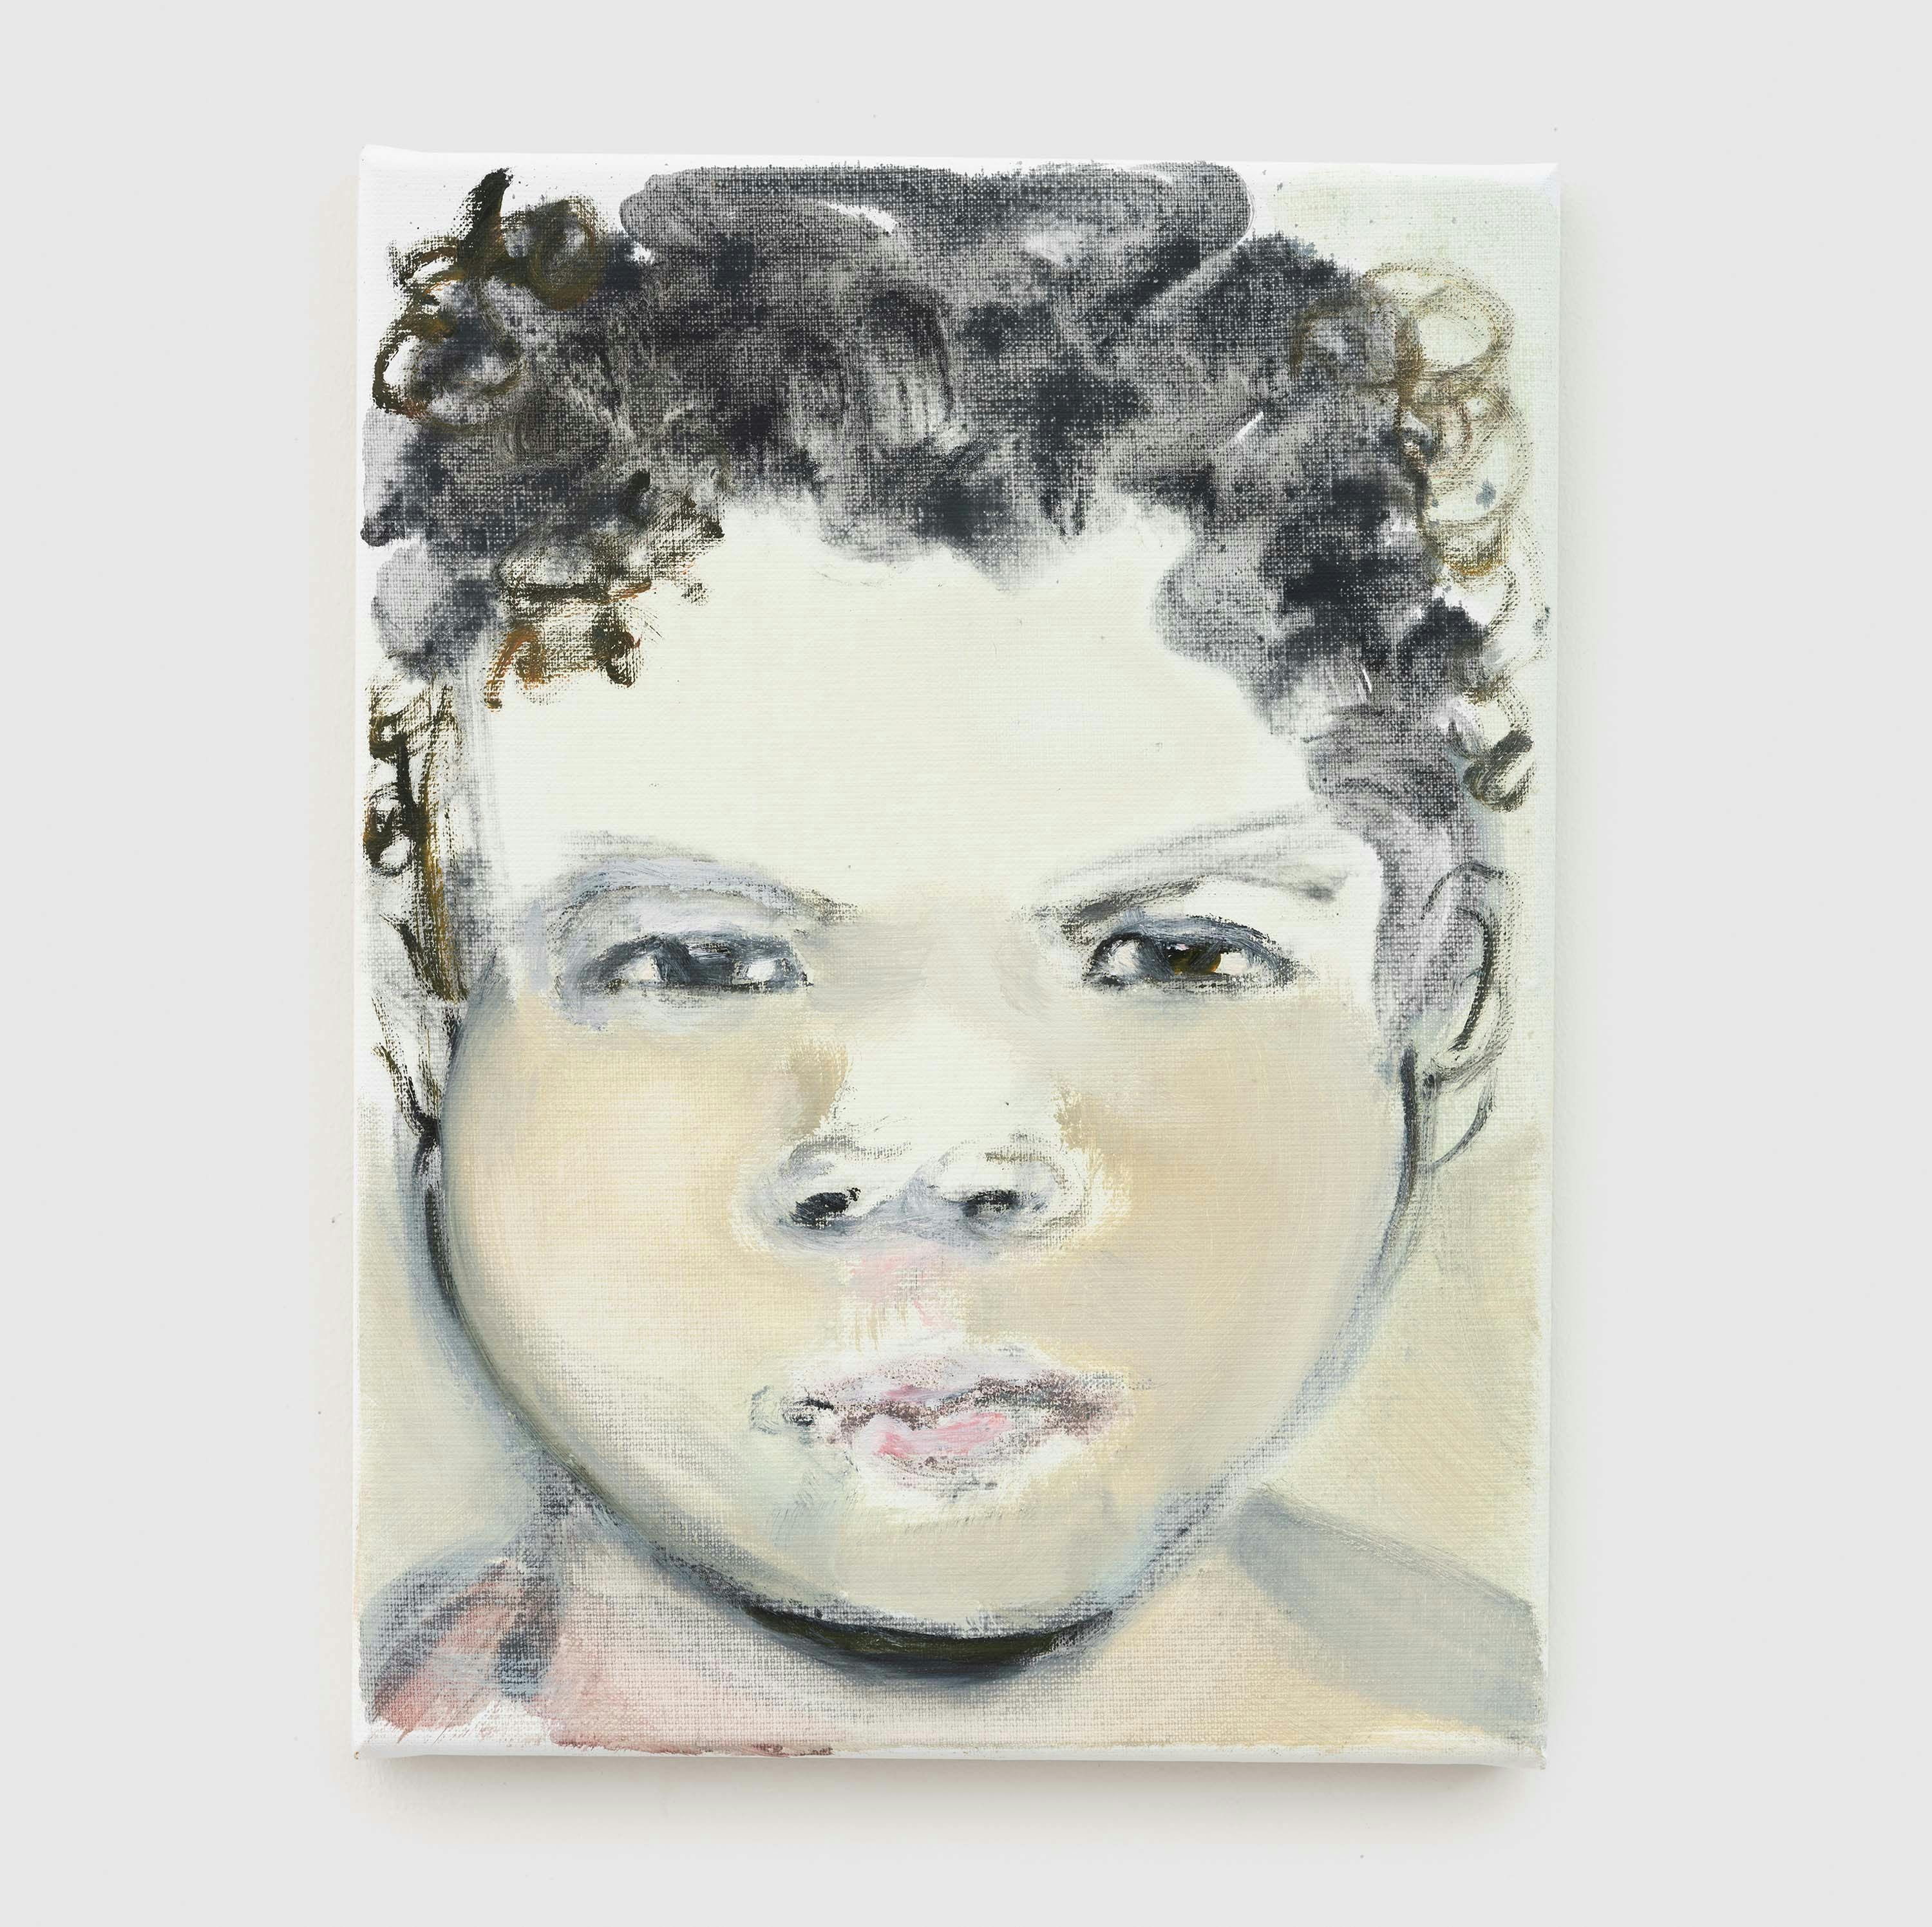 An oil on canvas painting by Marlene Dumas, titled Eden, dated 2020.